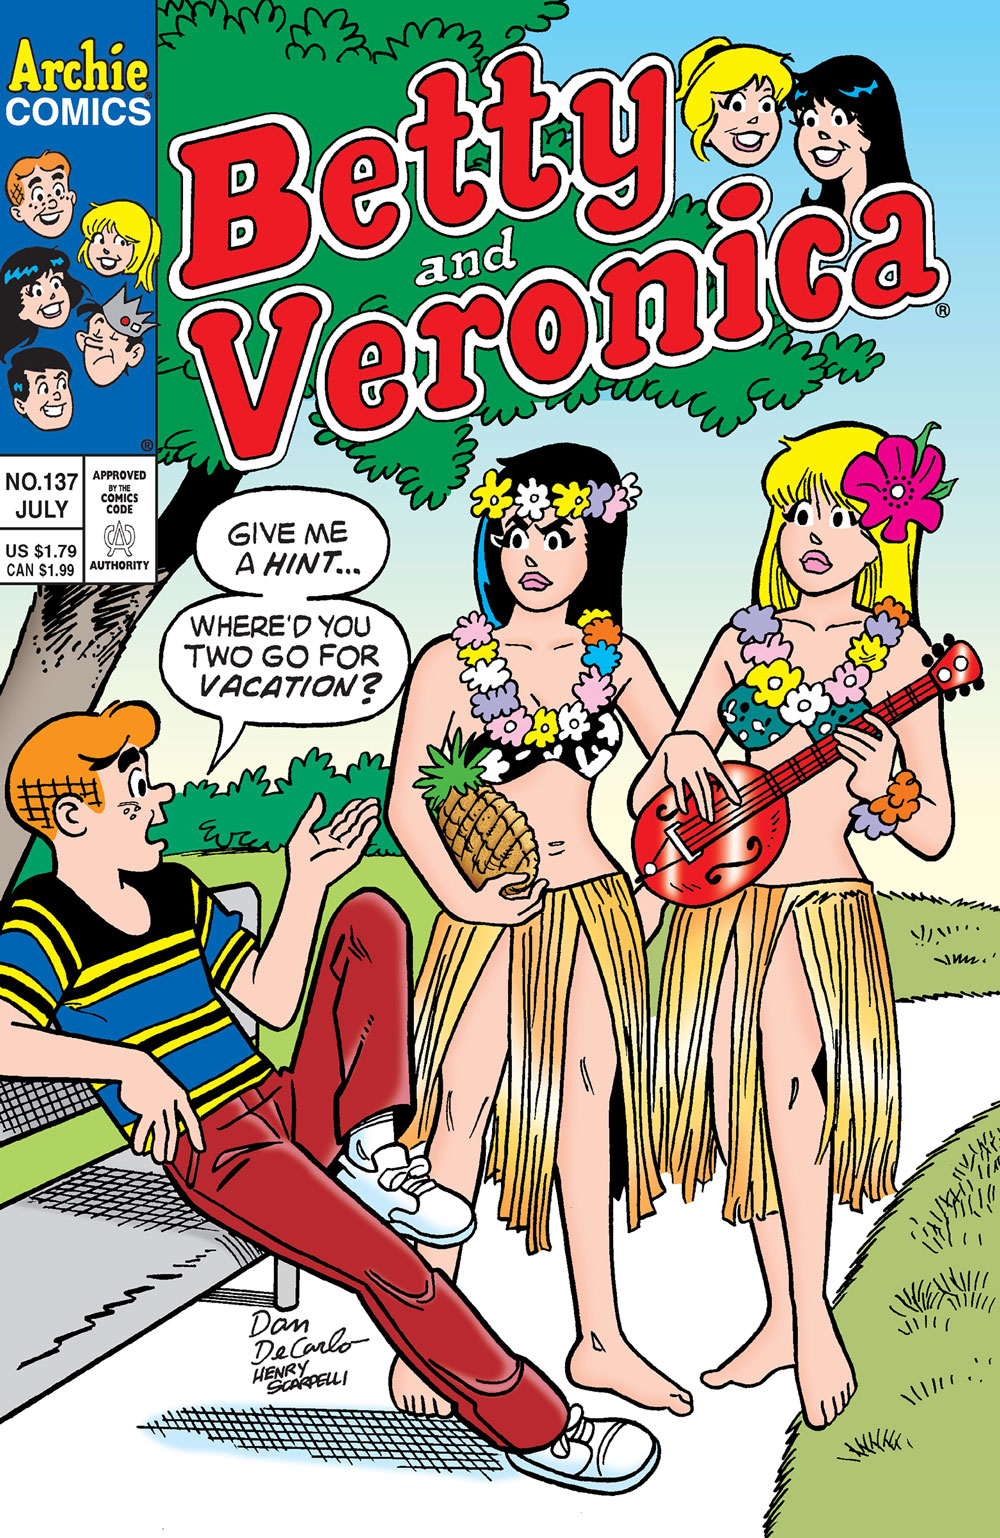 Betty and Veronica are wearing traditional Hawaiian dress. Archie asks them to give him a hint about where they went on vacation.